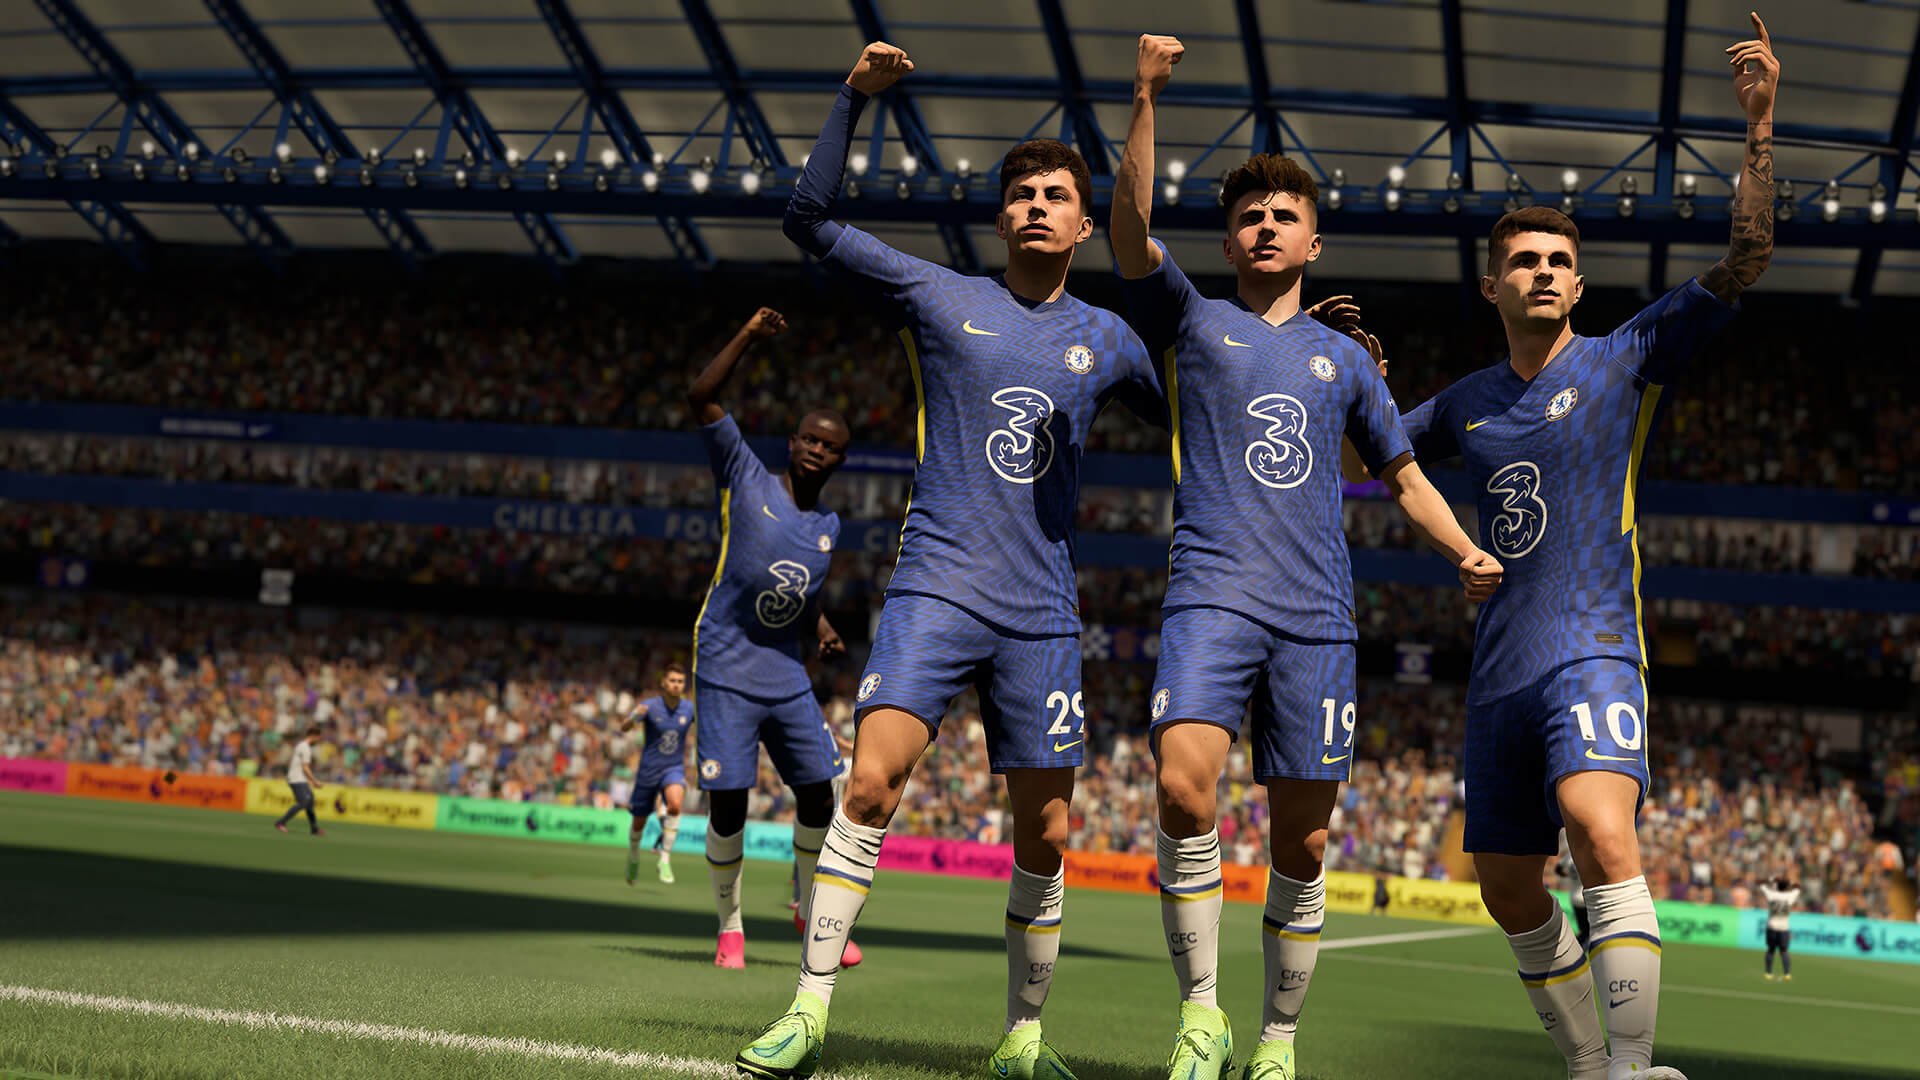 FIFA 22 One System Activation & Limited Features For PC Players - Xfire